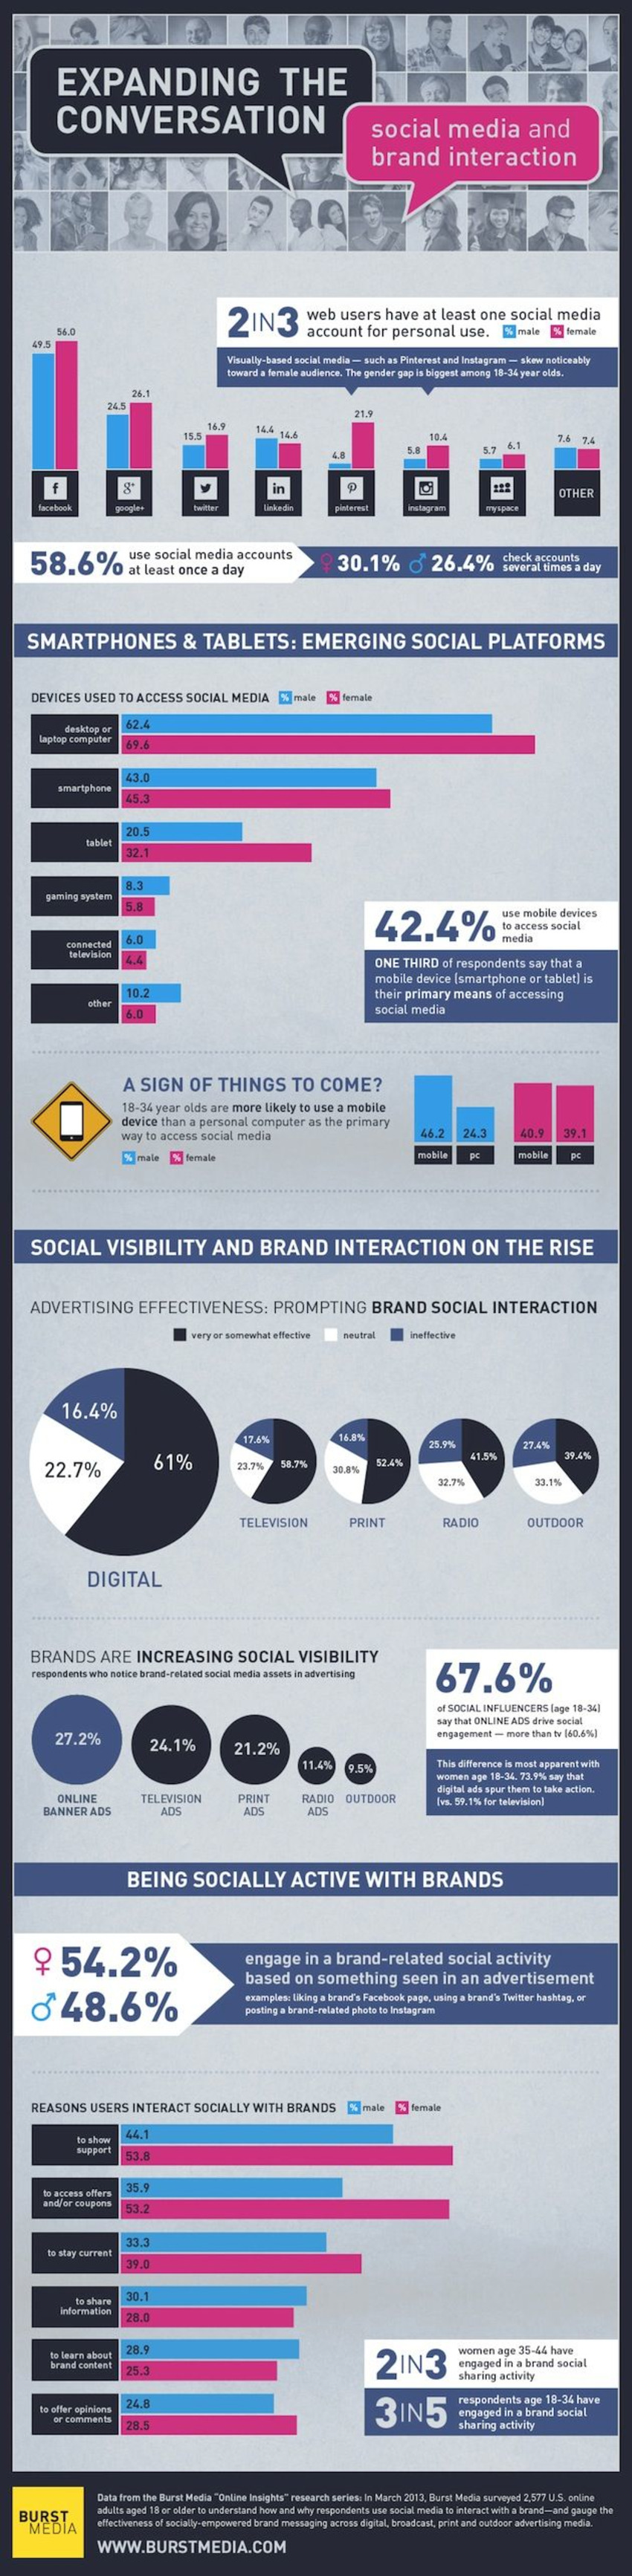 Effectiveness of Social Media Cues in Ads [Infographic] - Profs | The MarTech Digest | Scoop.it